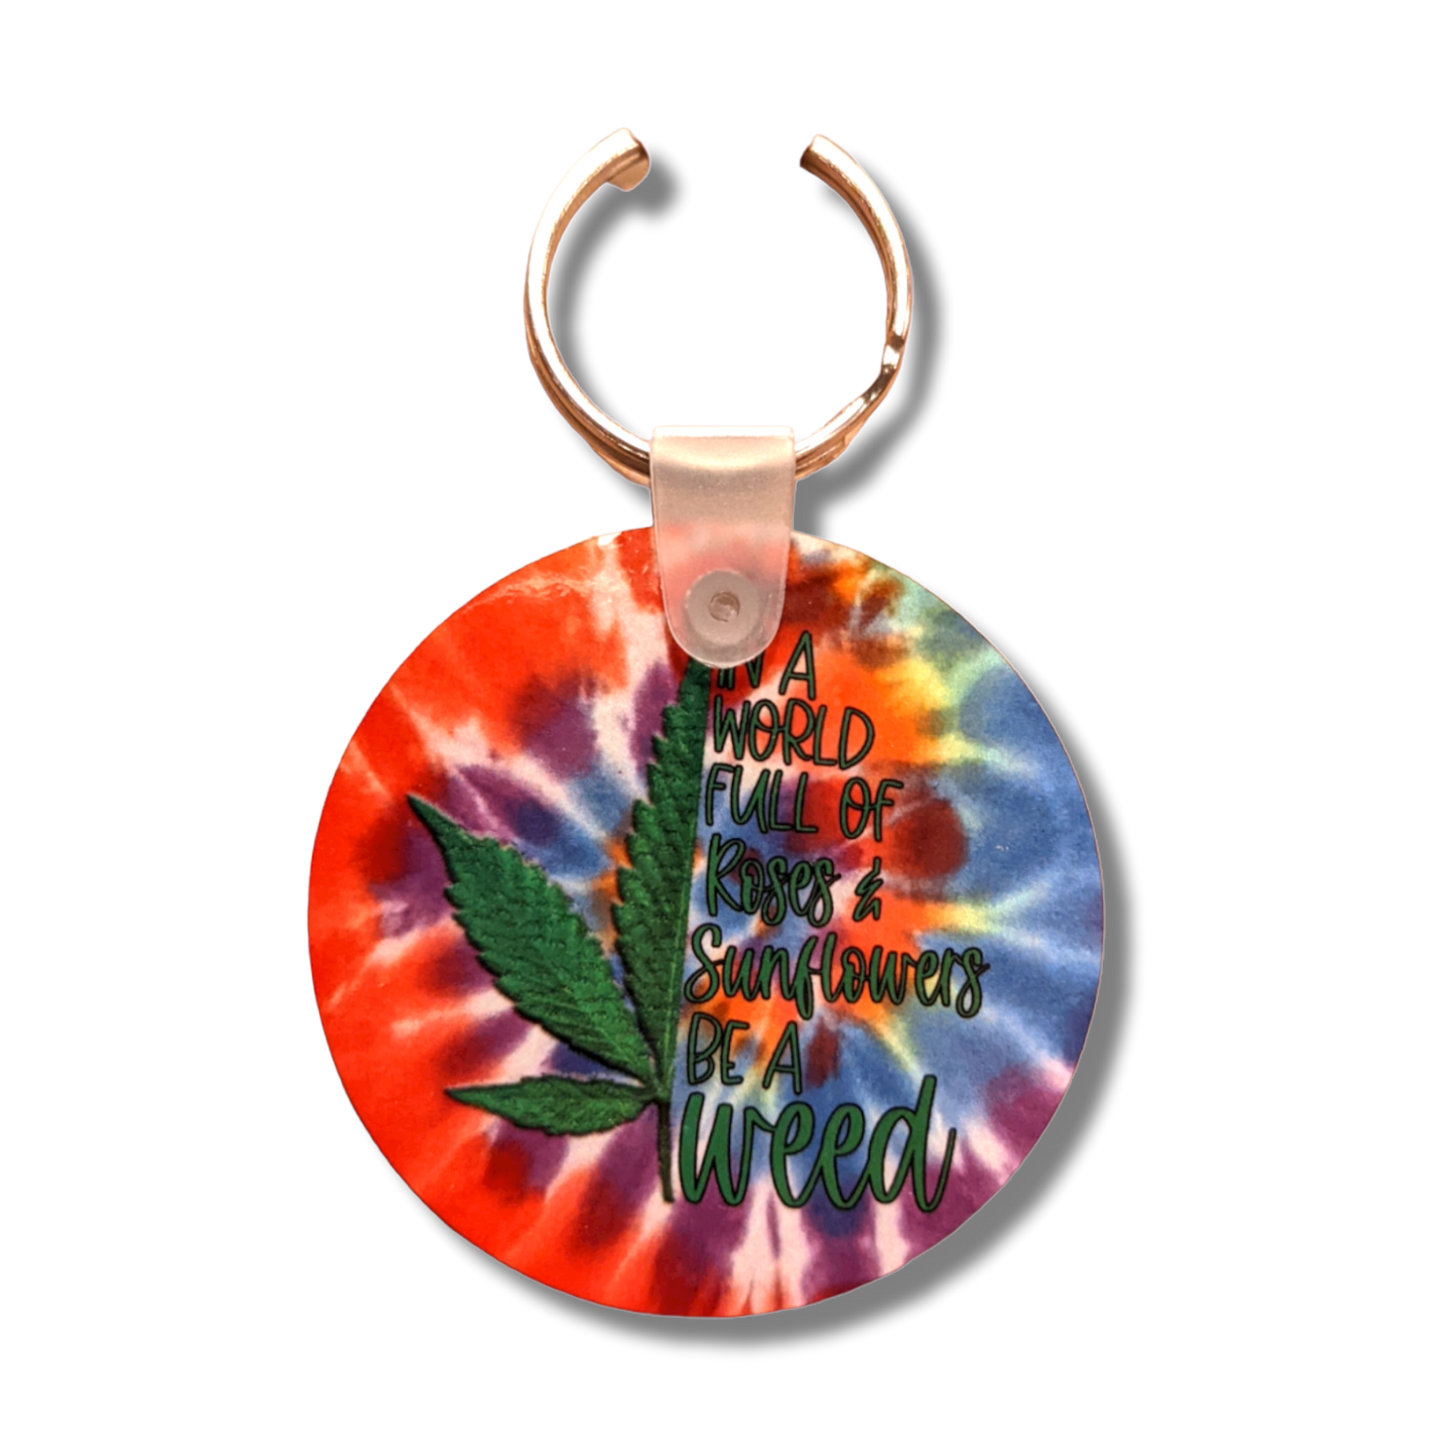 Be a Weed Keychain